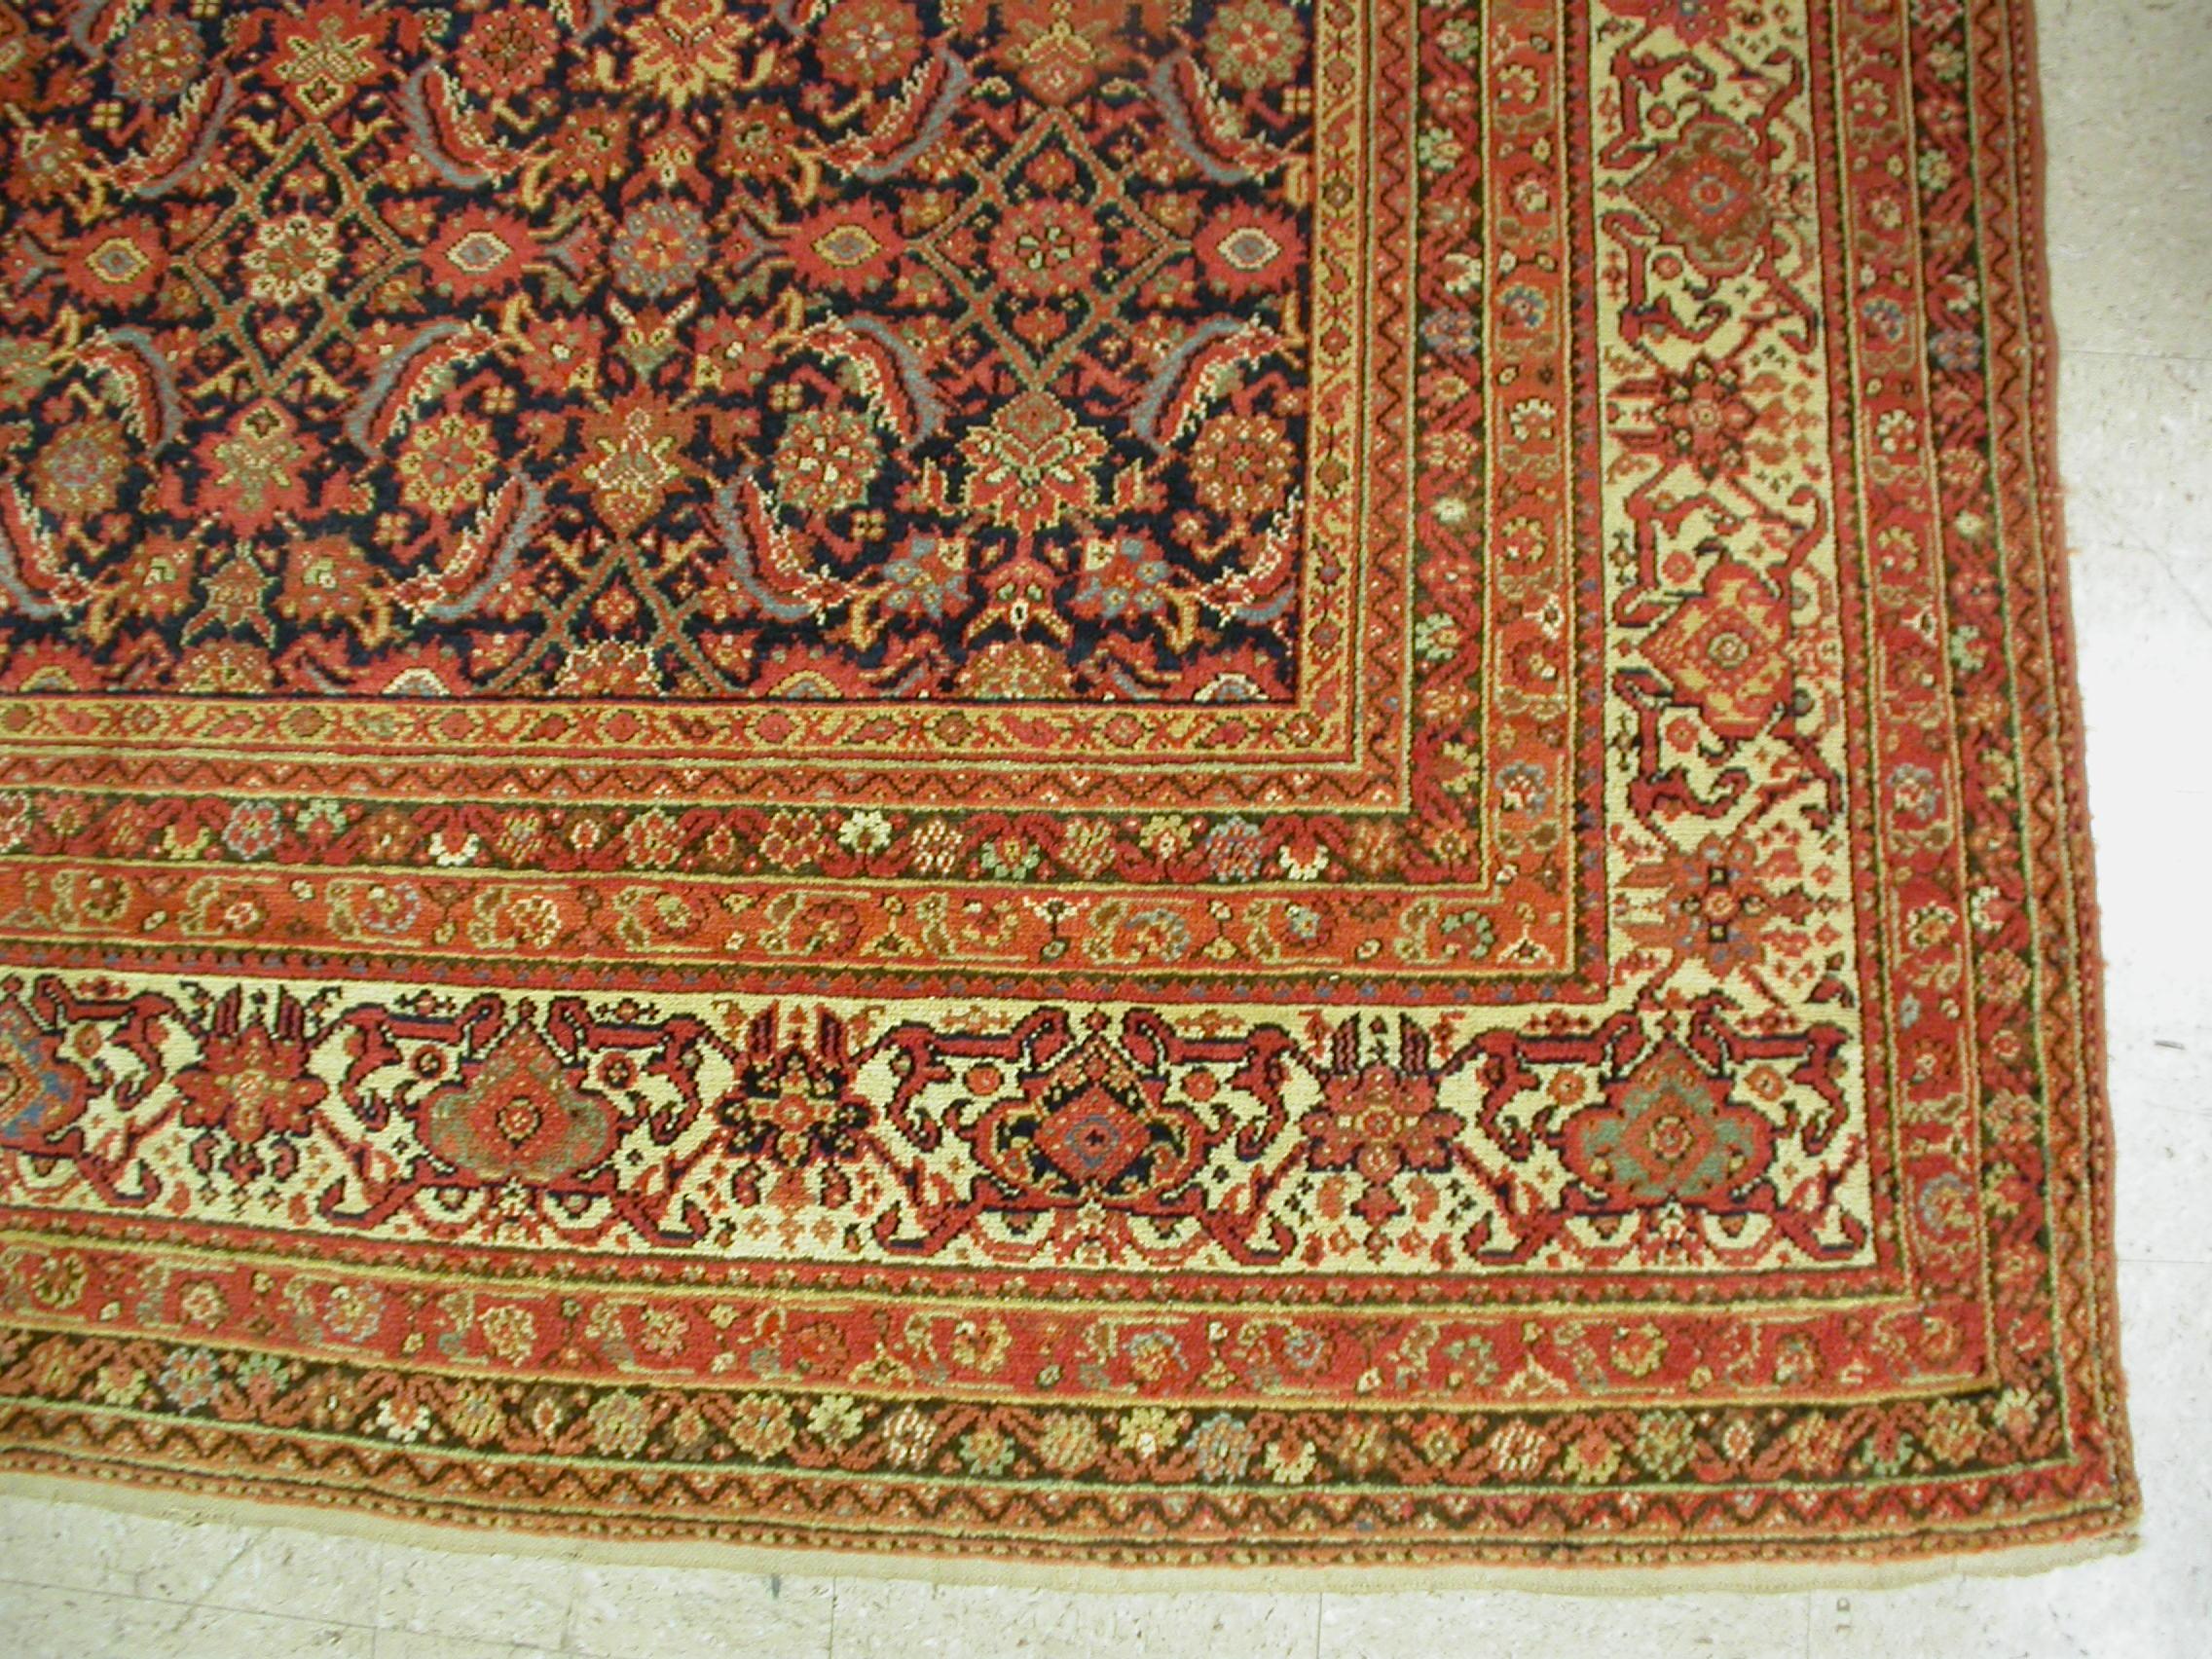 This is a fine example of a large square Antique Malayer dating from the 1910-1920s measuring: 13.8 x 13.10 ft.

Antique Malayer rugs were woven in the small town of Malayer, located south of Hamedan on the road to Arak. The location in relation